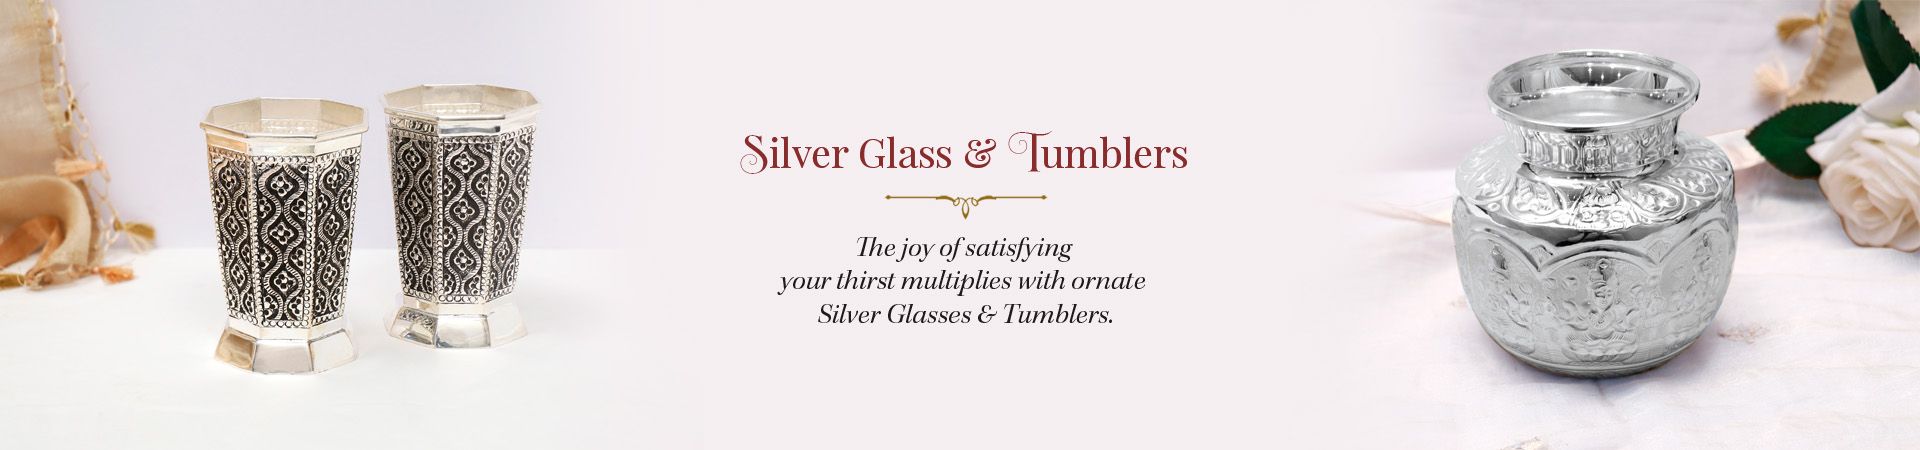 Silver Tumblers and Glass